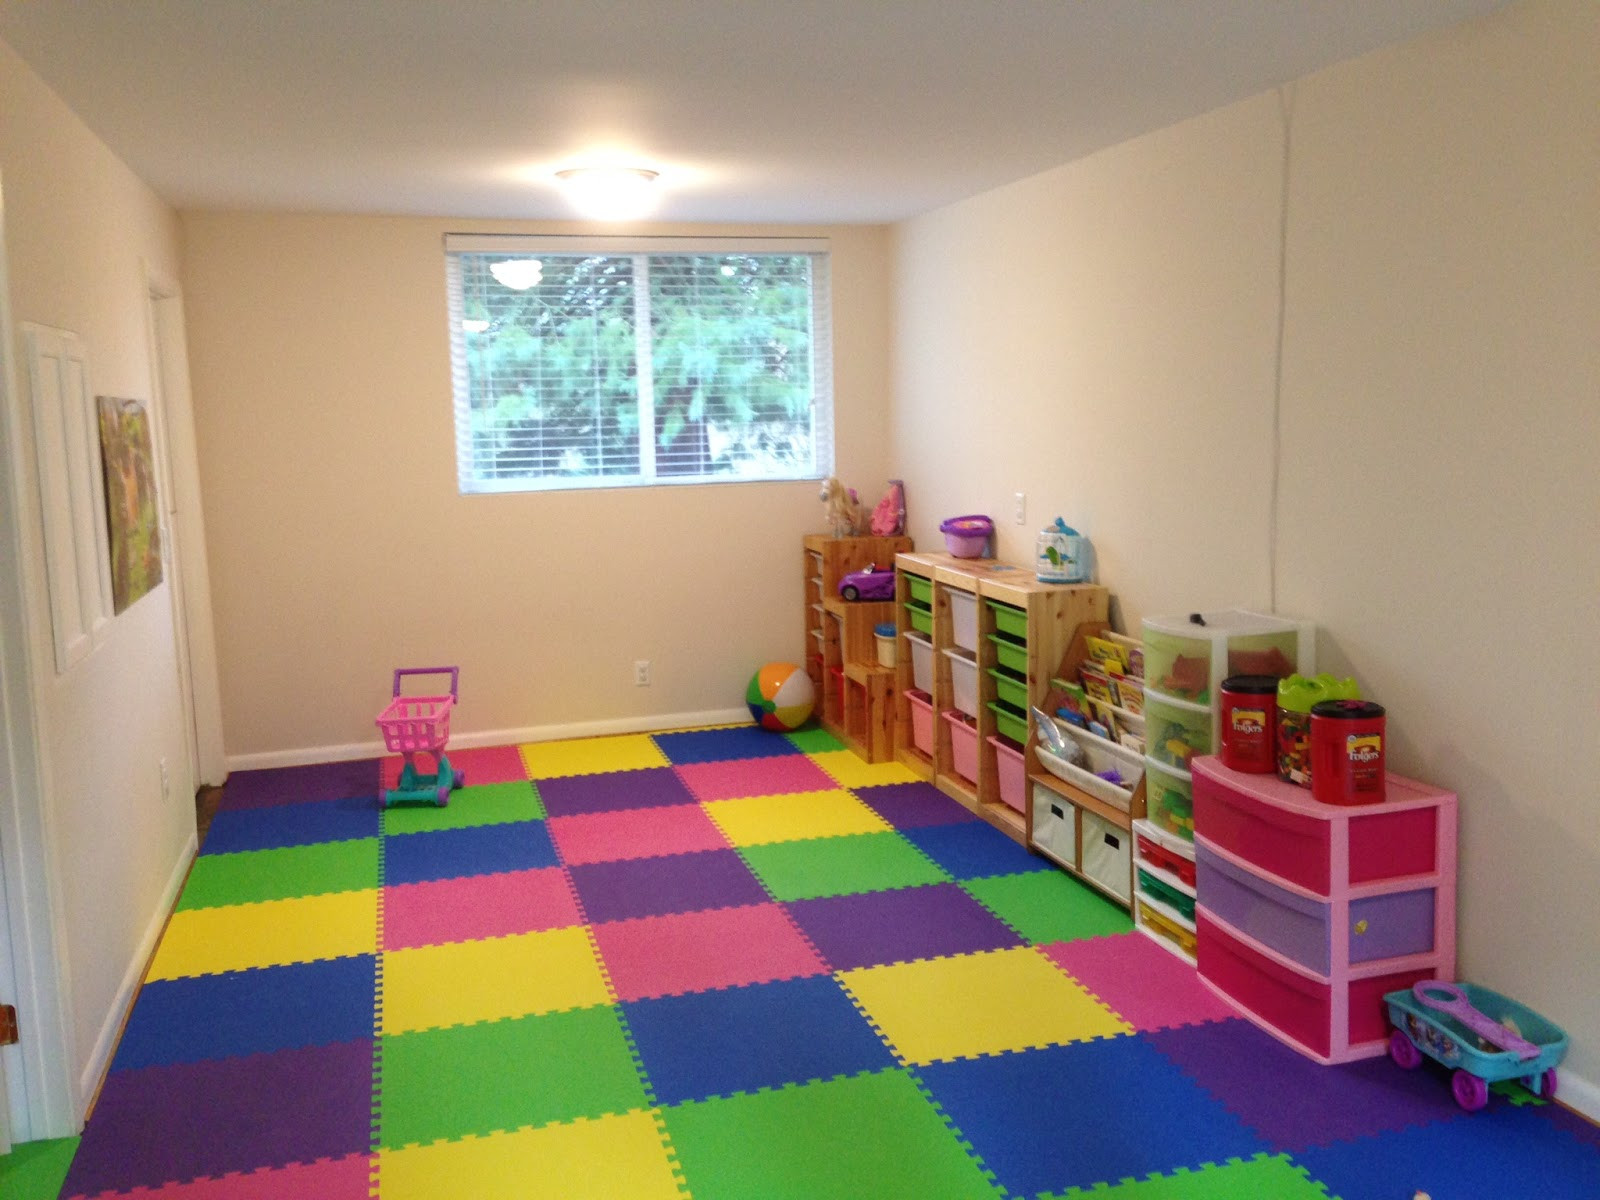 Carpet Tiles For Kids Room
 Greatmats Specialty Flooring Mats and Tiles Creating a